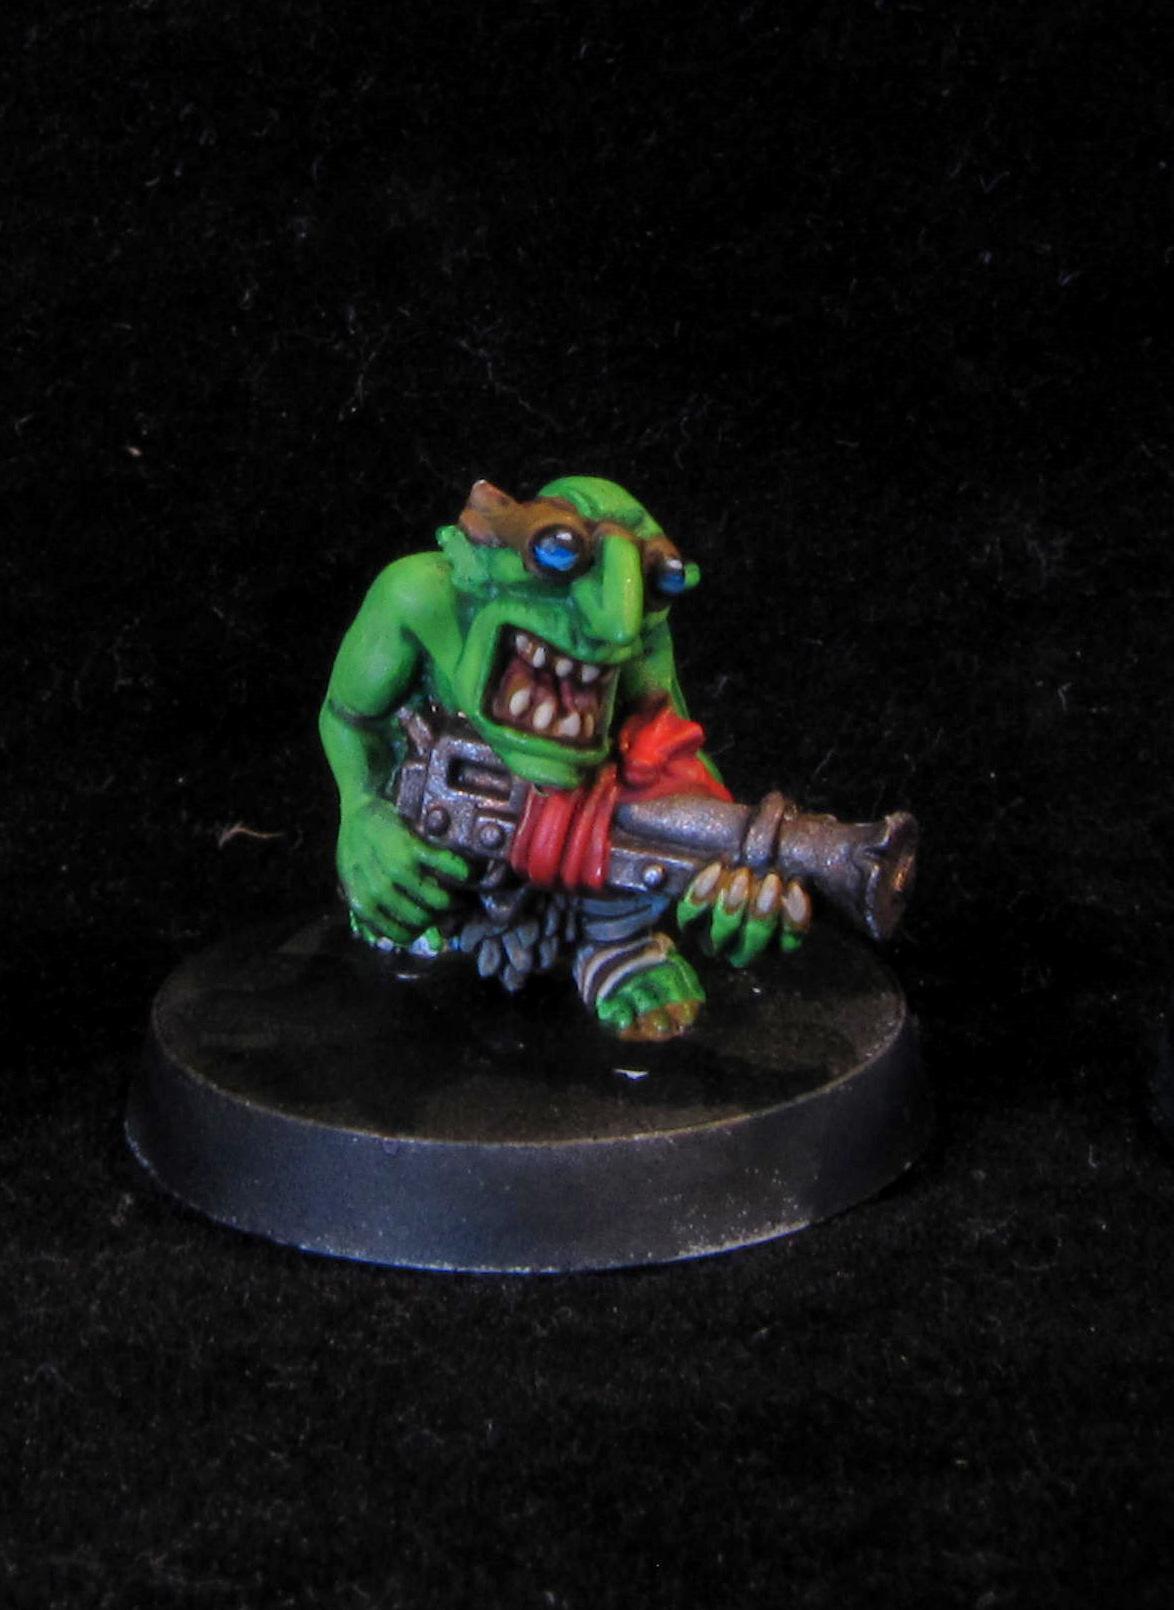 more grots!